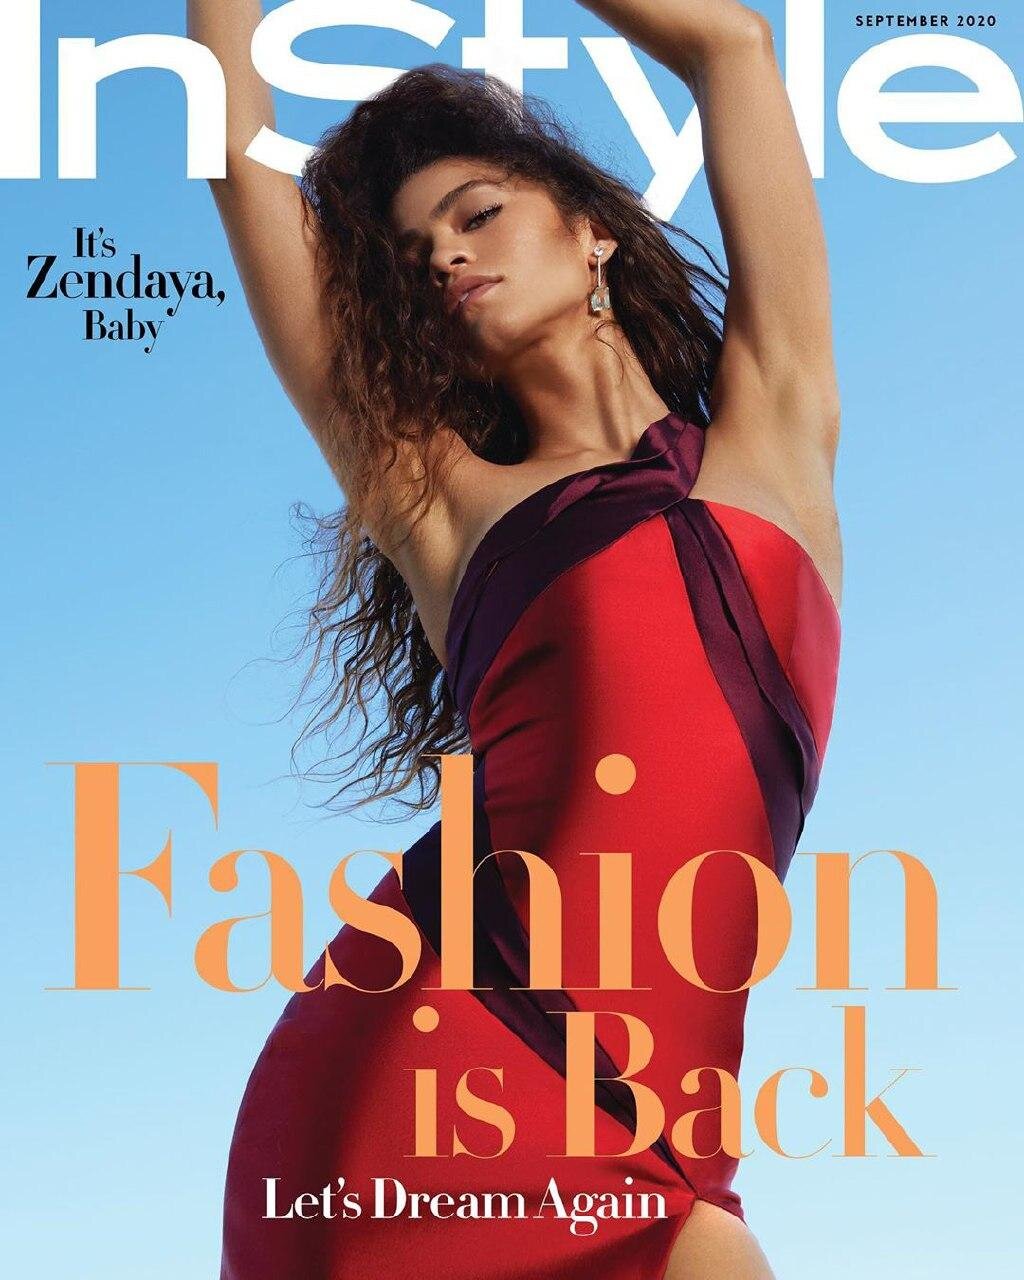 Zendaya by AB+DM for InStyle US Sept 2020 (3).jpg